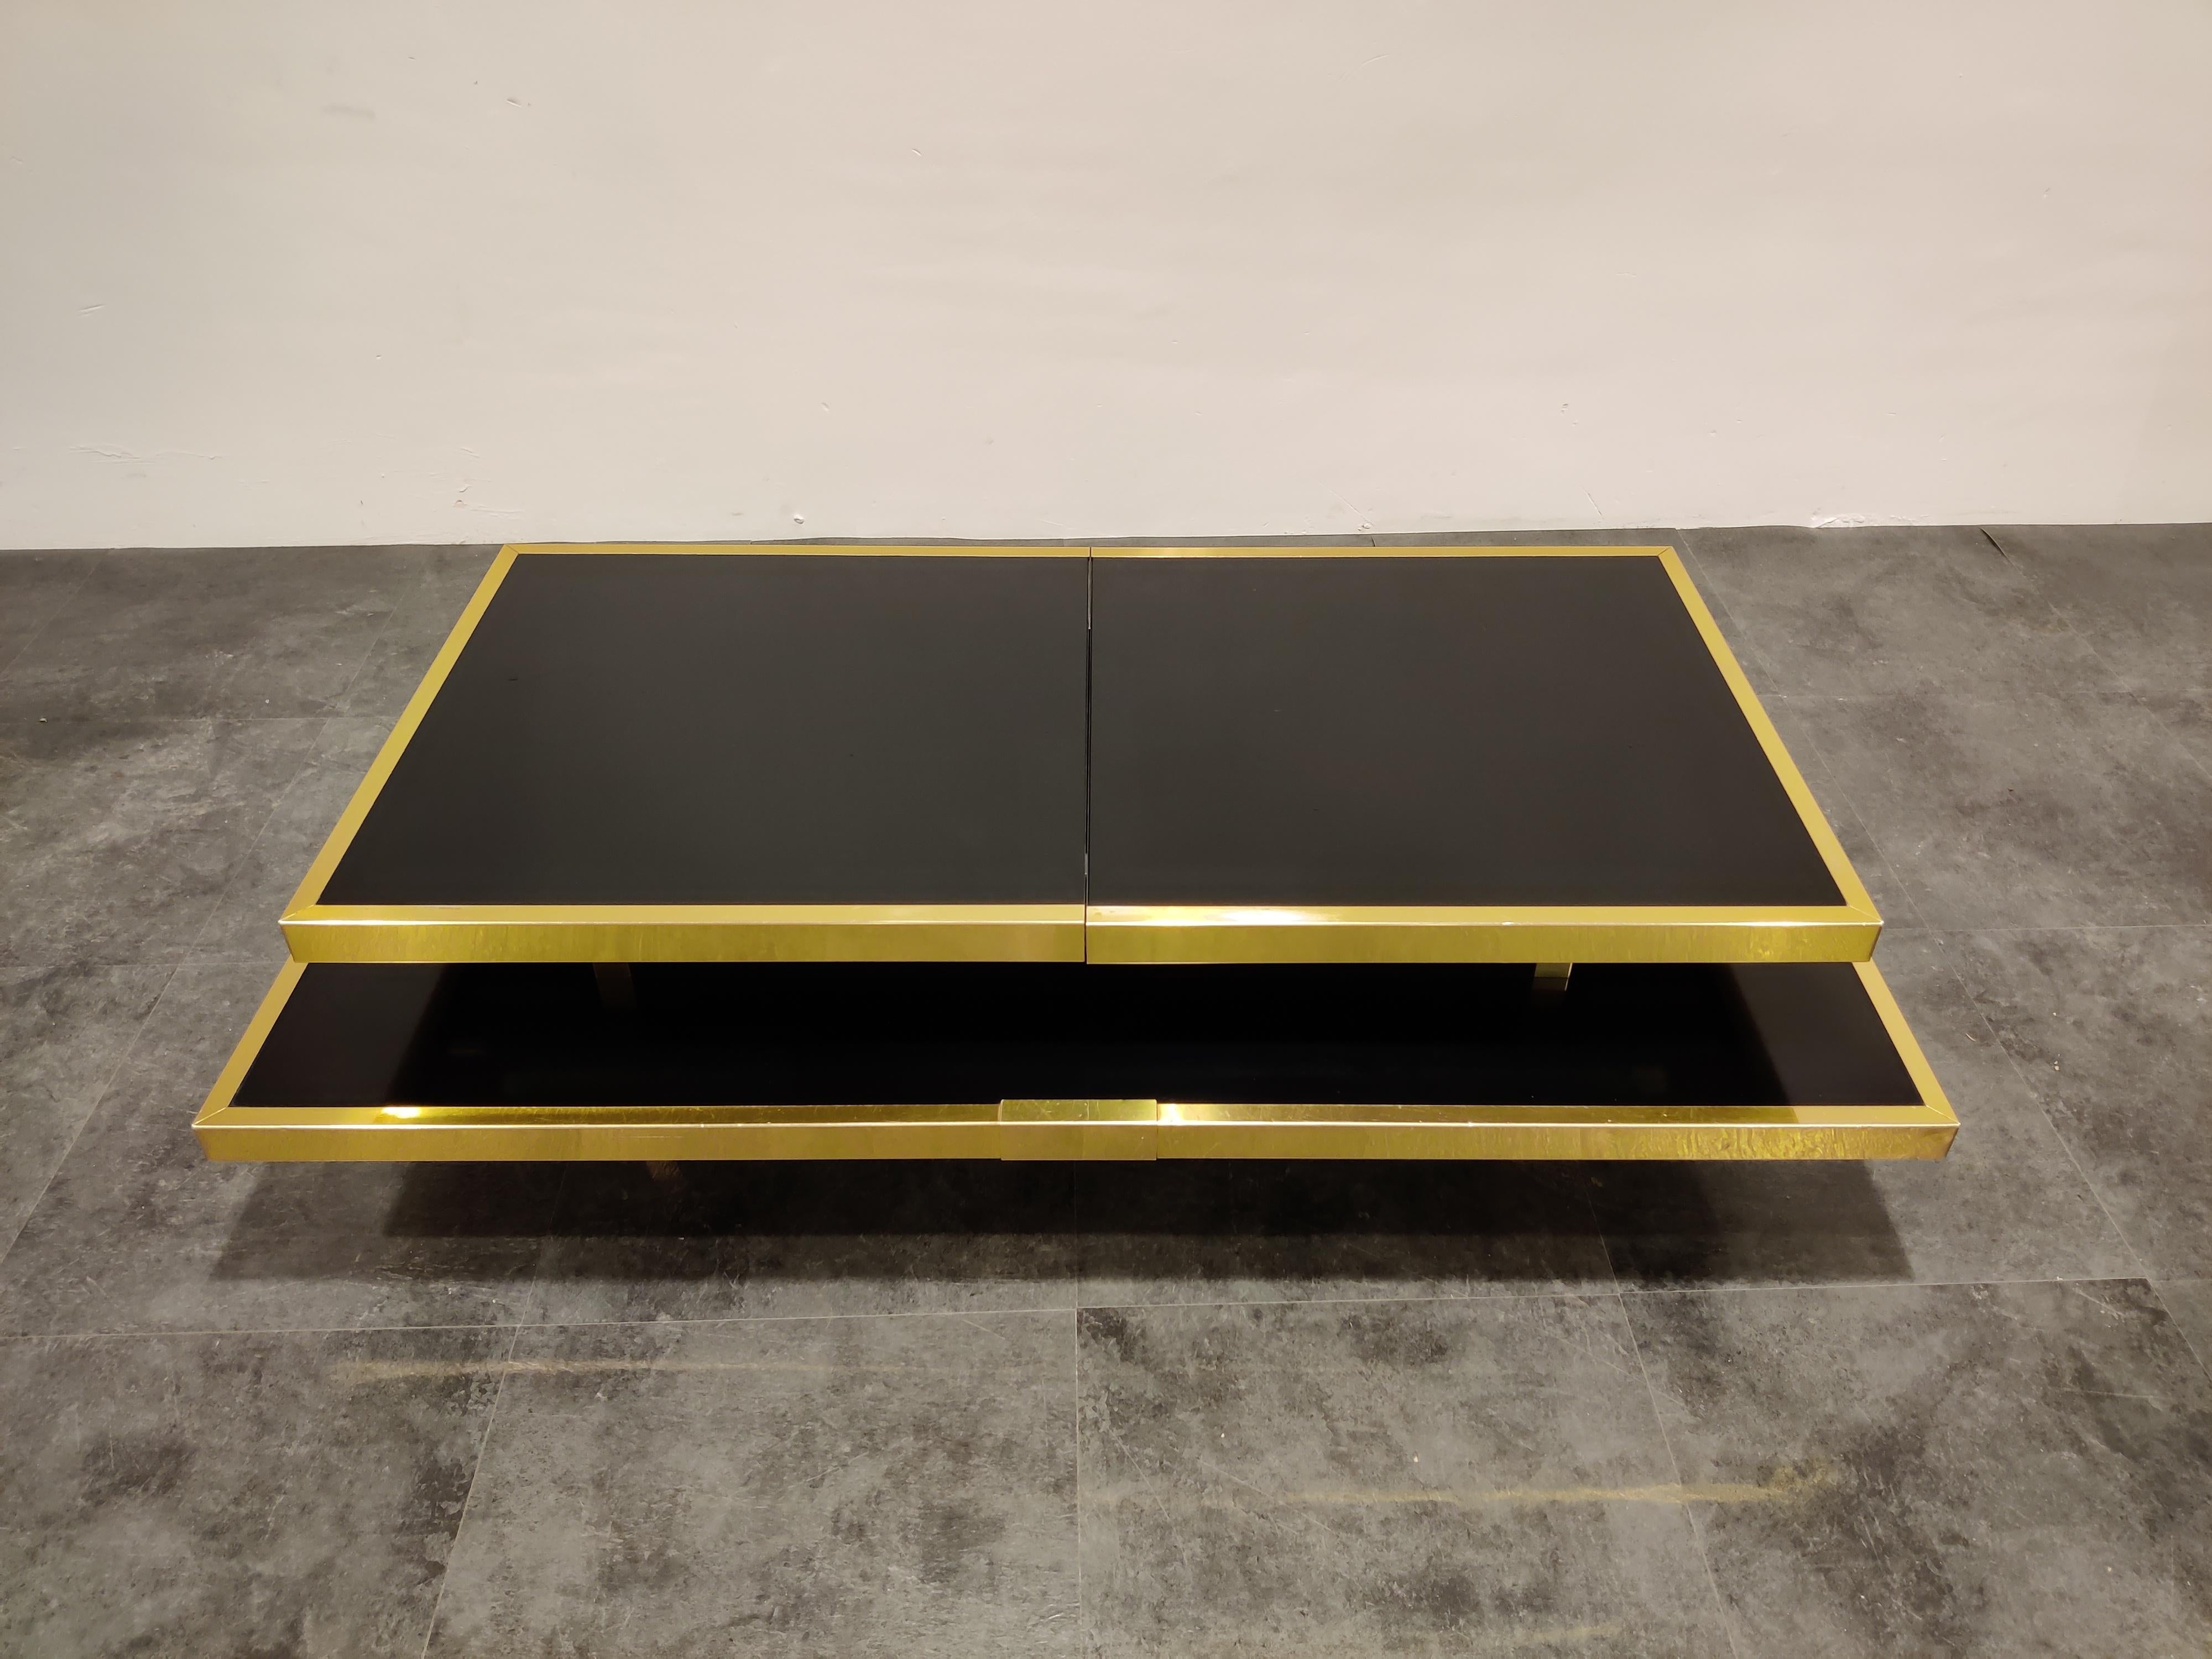 Rare hidden bar coffee table with a sliding table top.

Made from brass and lacquered wood.

Inside you can store six bottles and glasses.

Good original condition.

Measures: Height 36cm/14.17